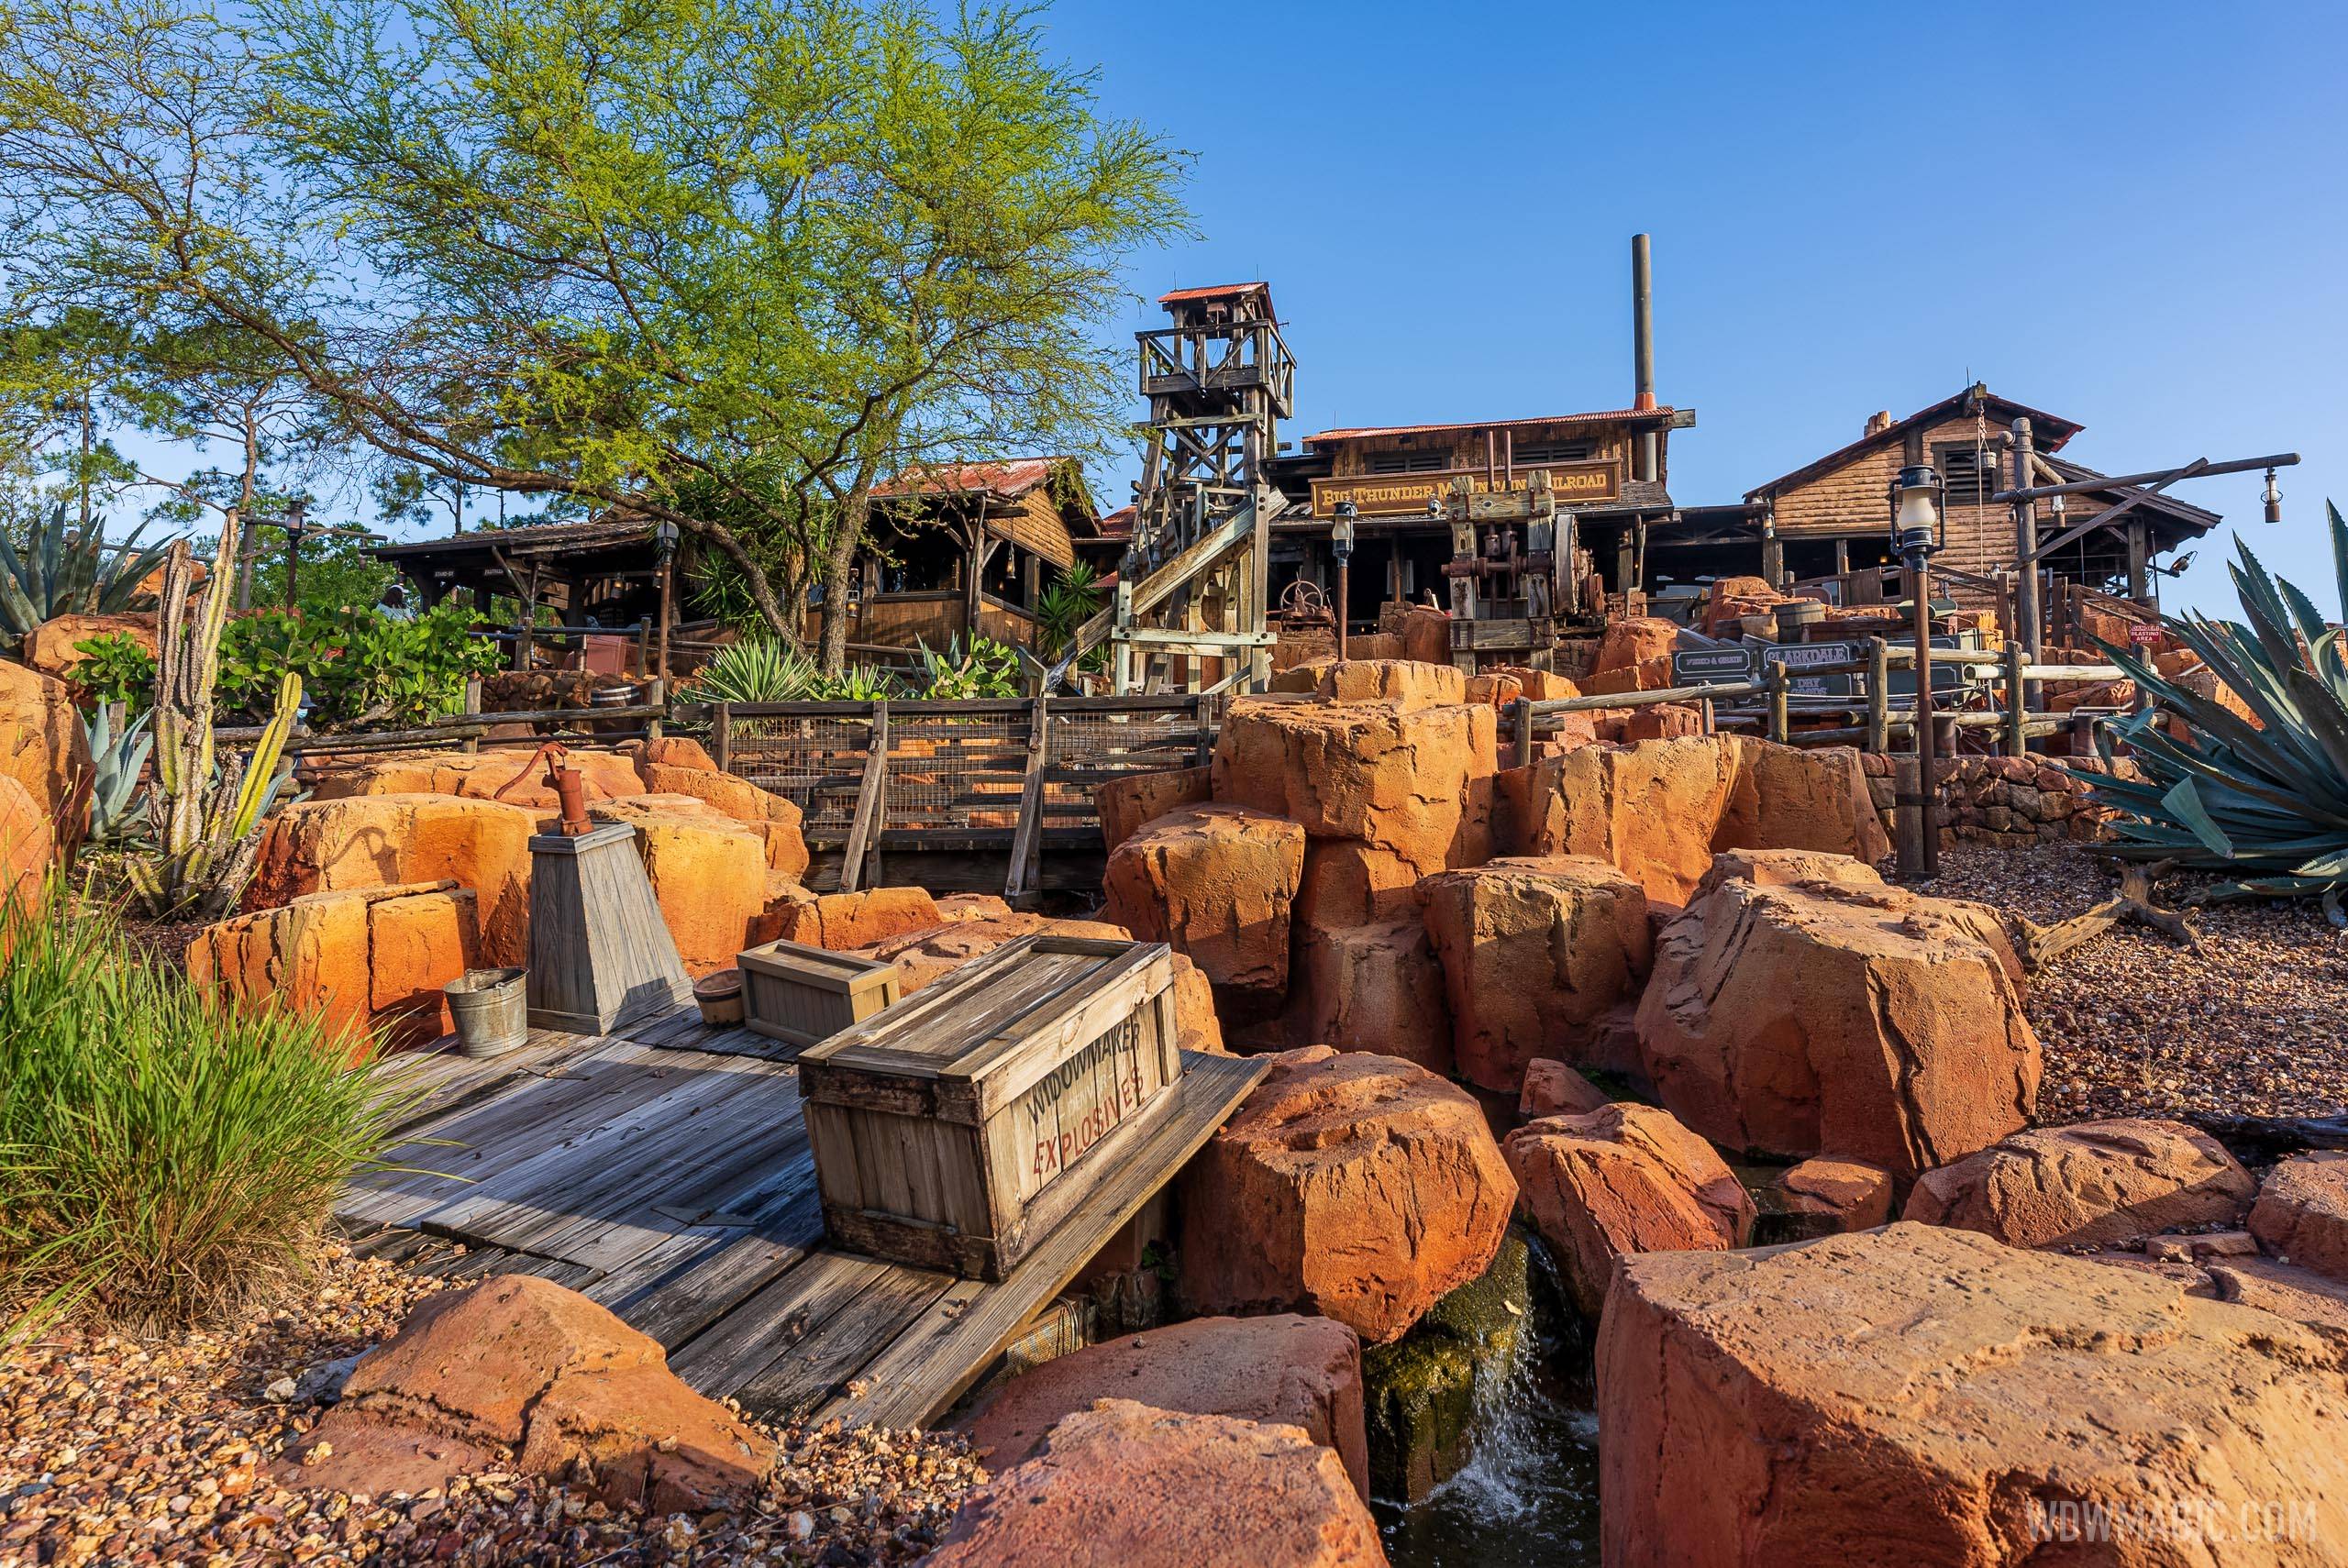 Big Thunder Mountain closing for a one day refurbishment in November